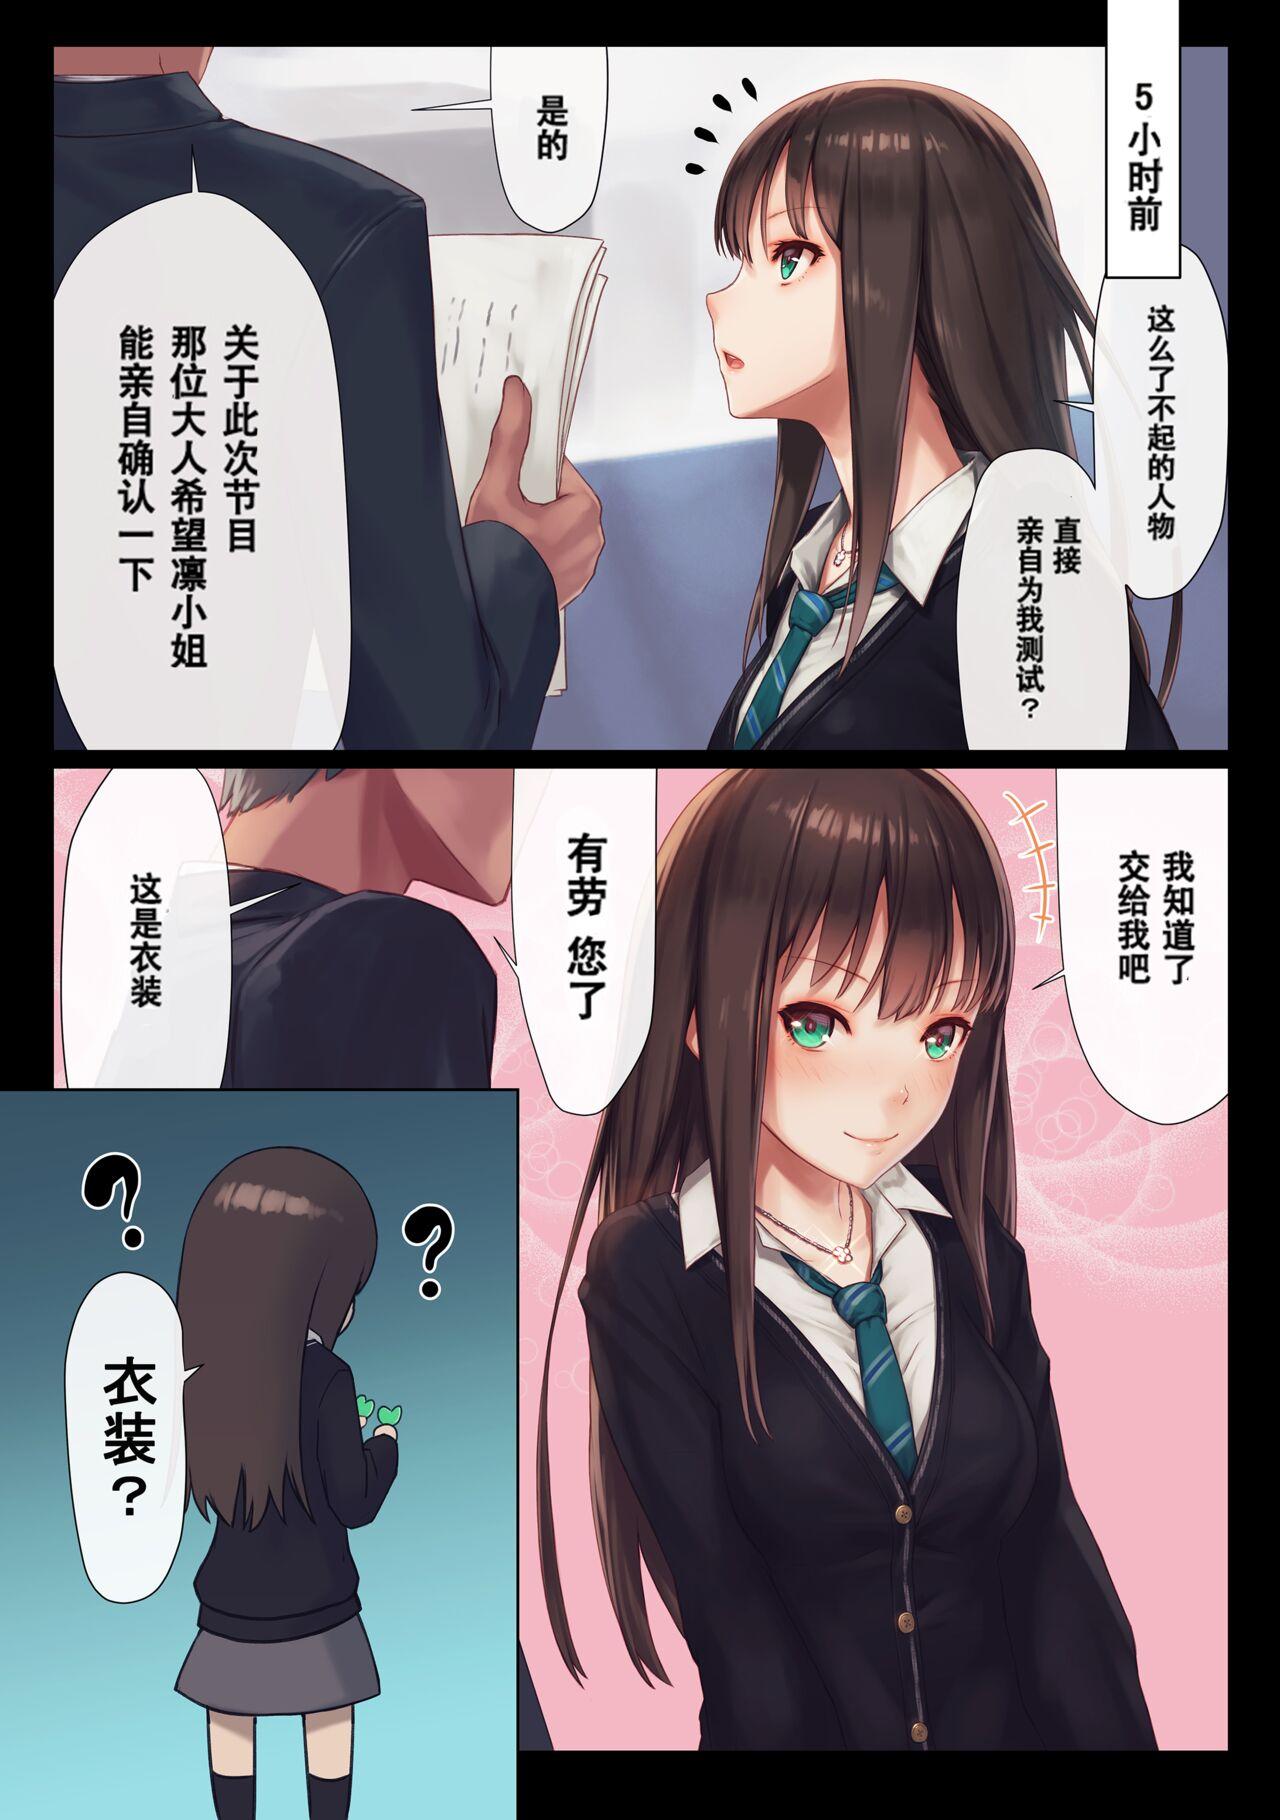 Perfect Body Gentle Master - The idolmaster White Girl - Page 4